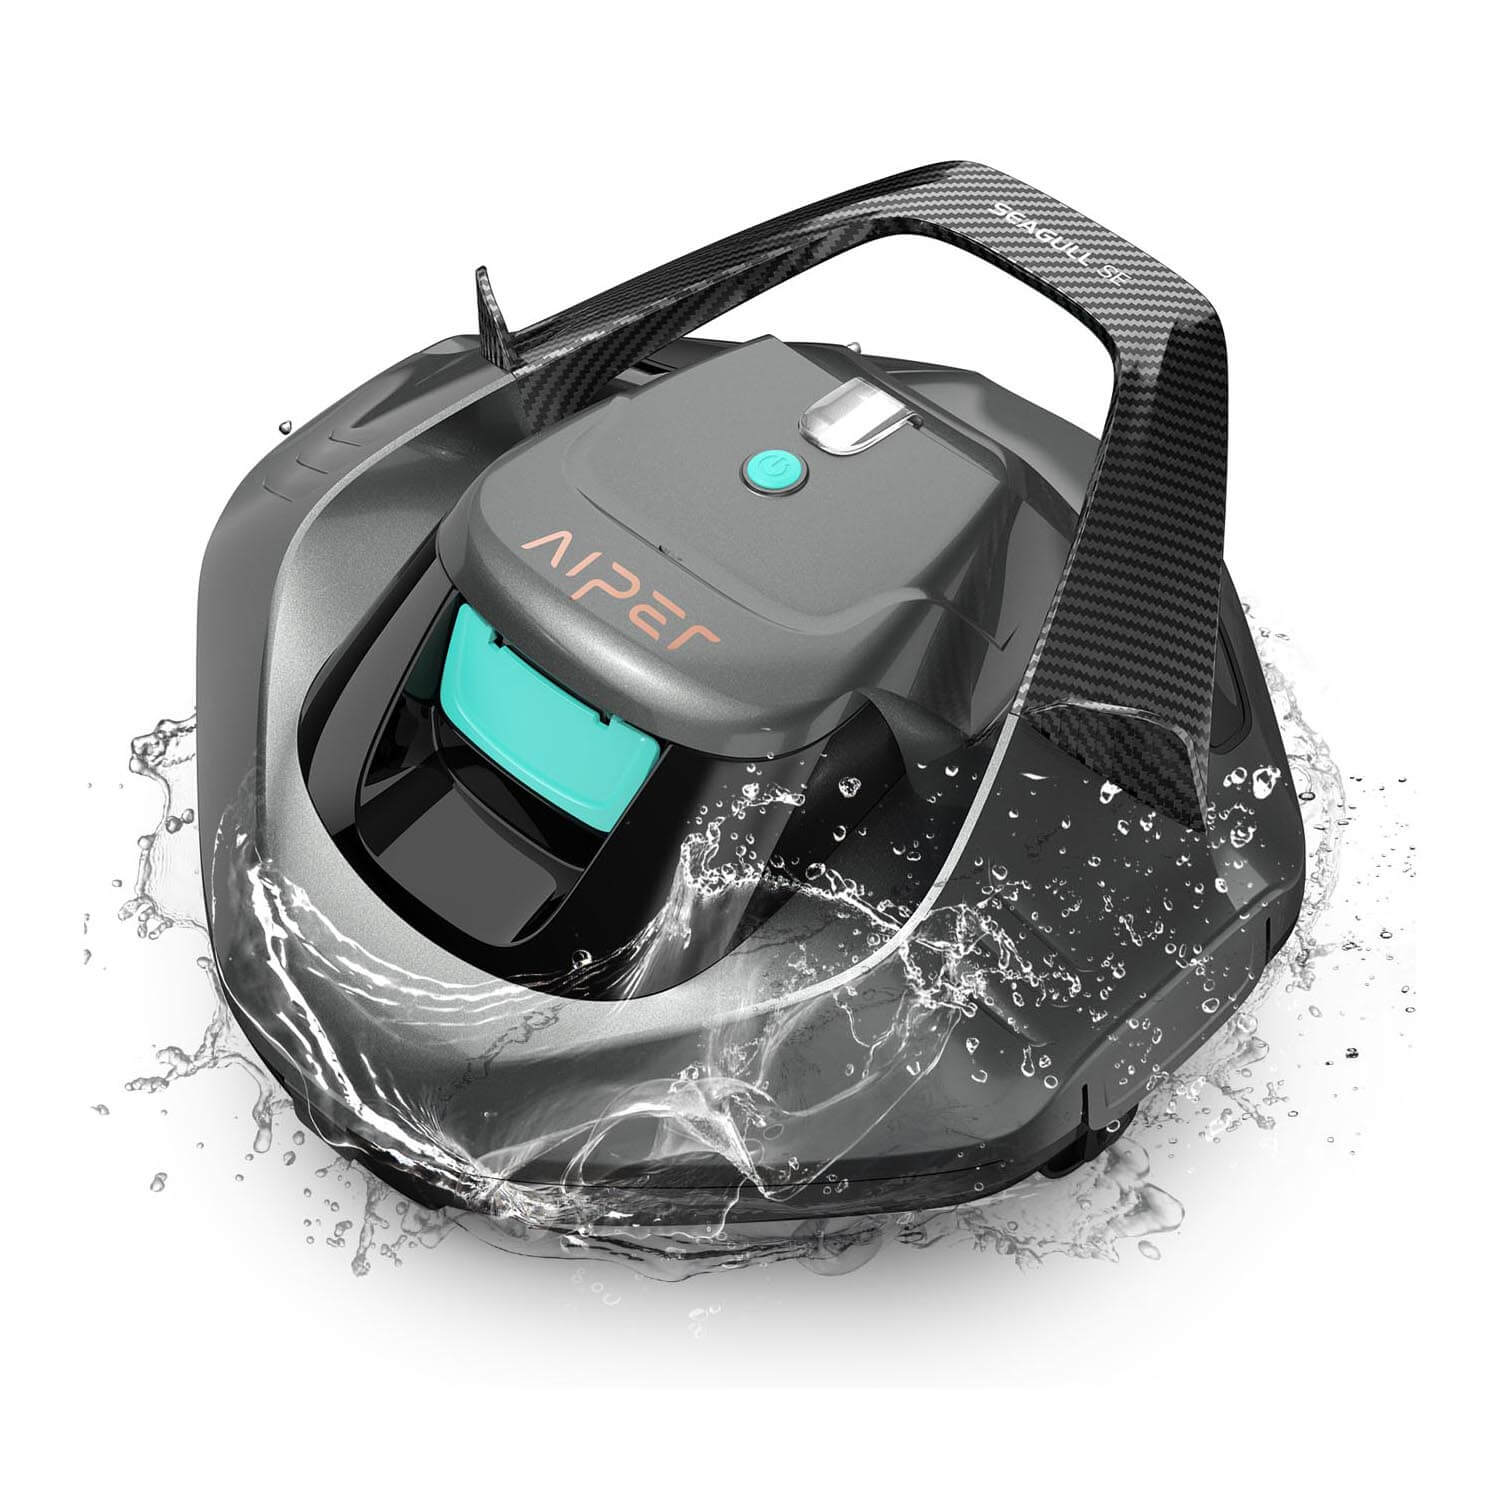 Aiper cordless pool cleaning system